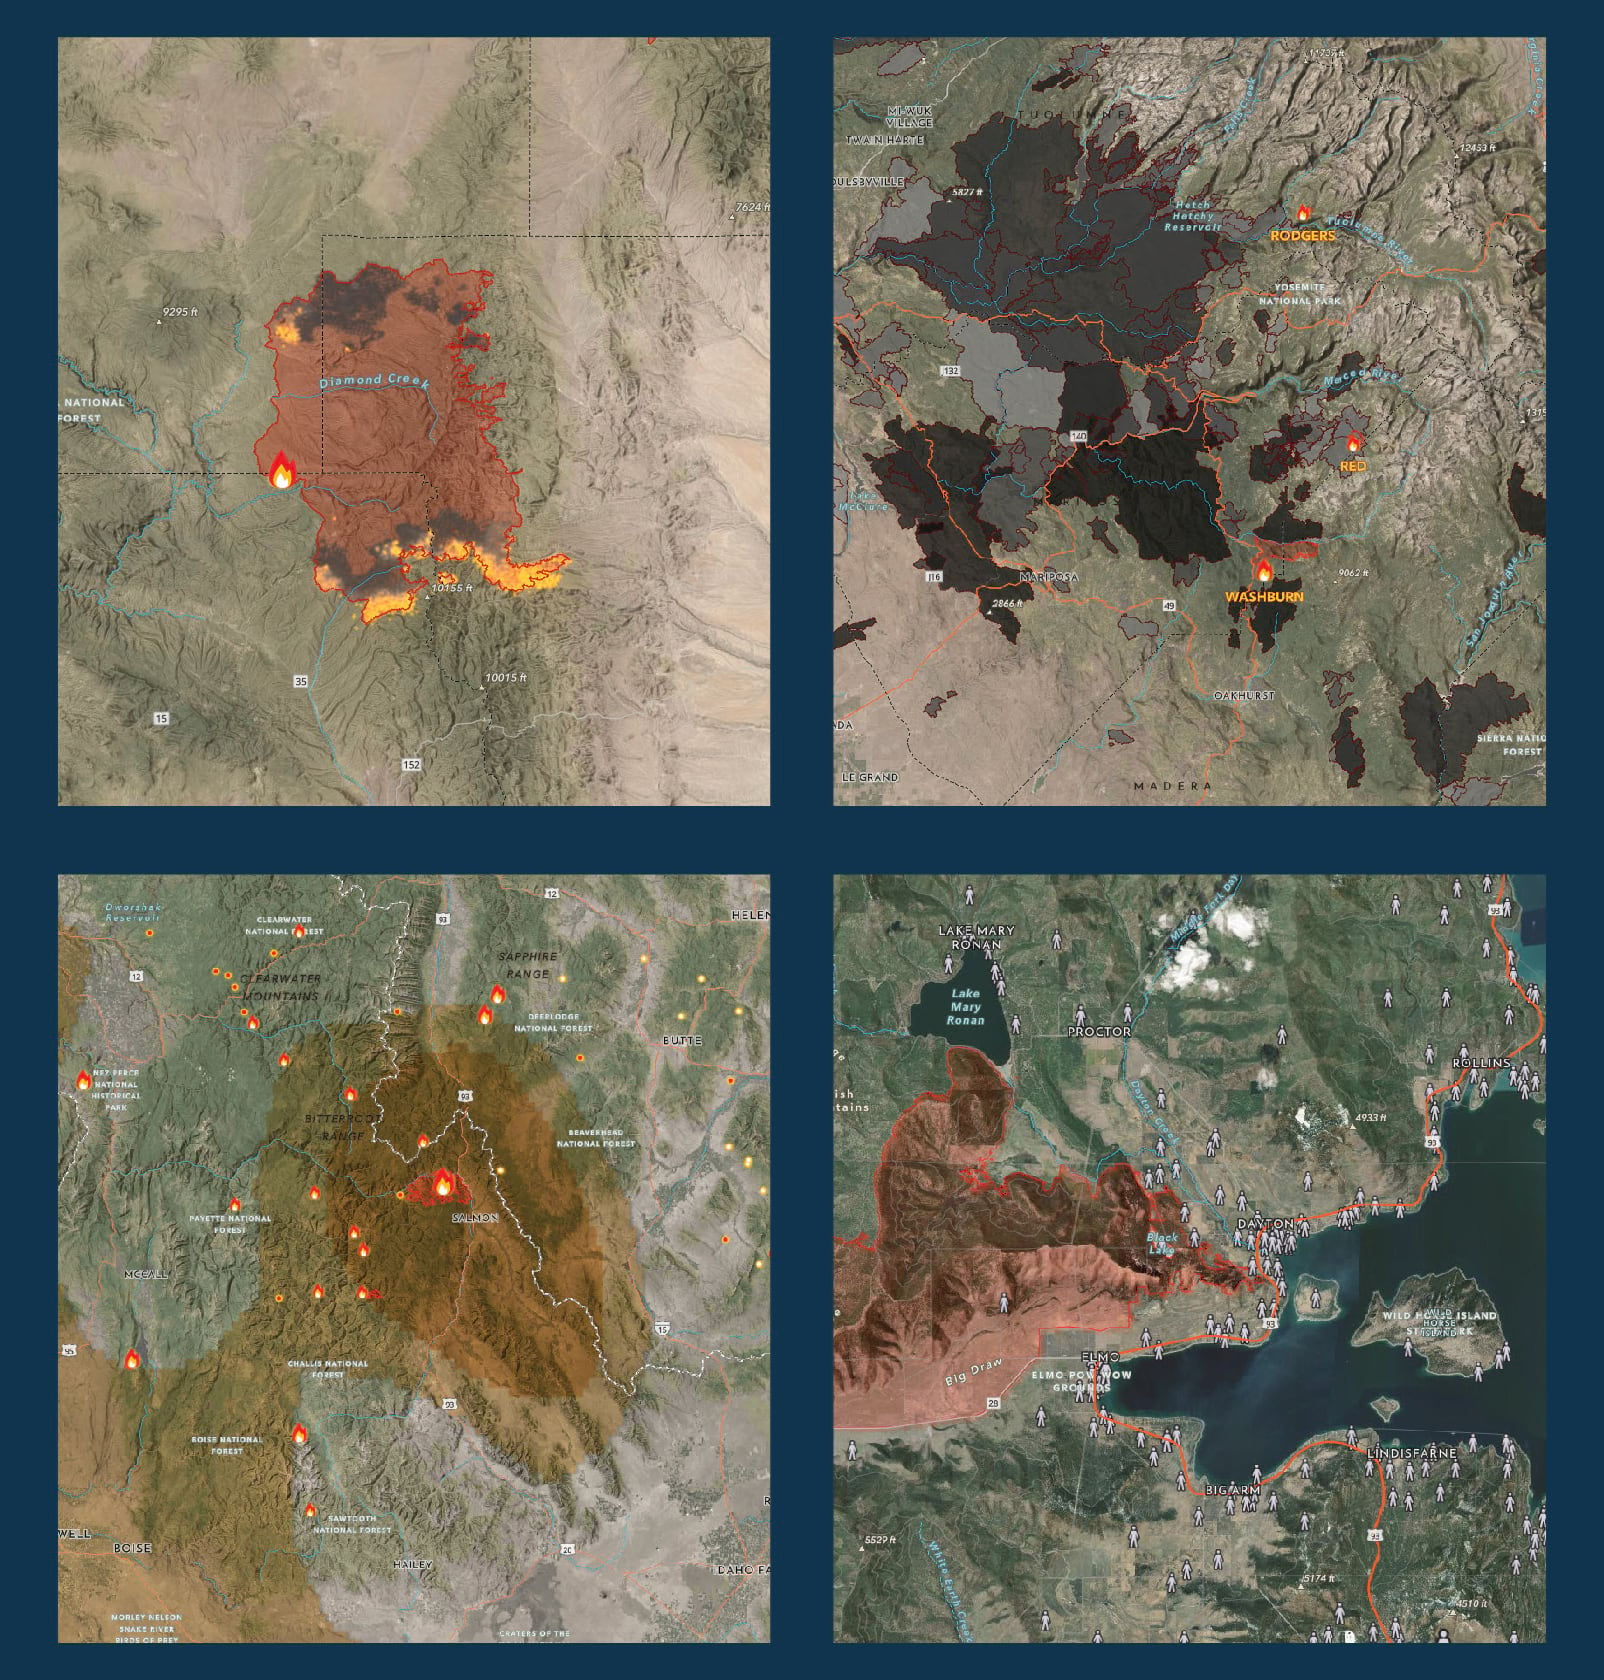 Graphic showing hot spots, burn history, air quality, and population